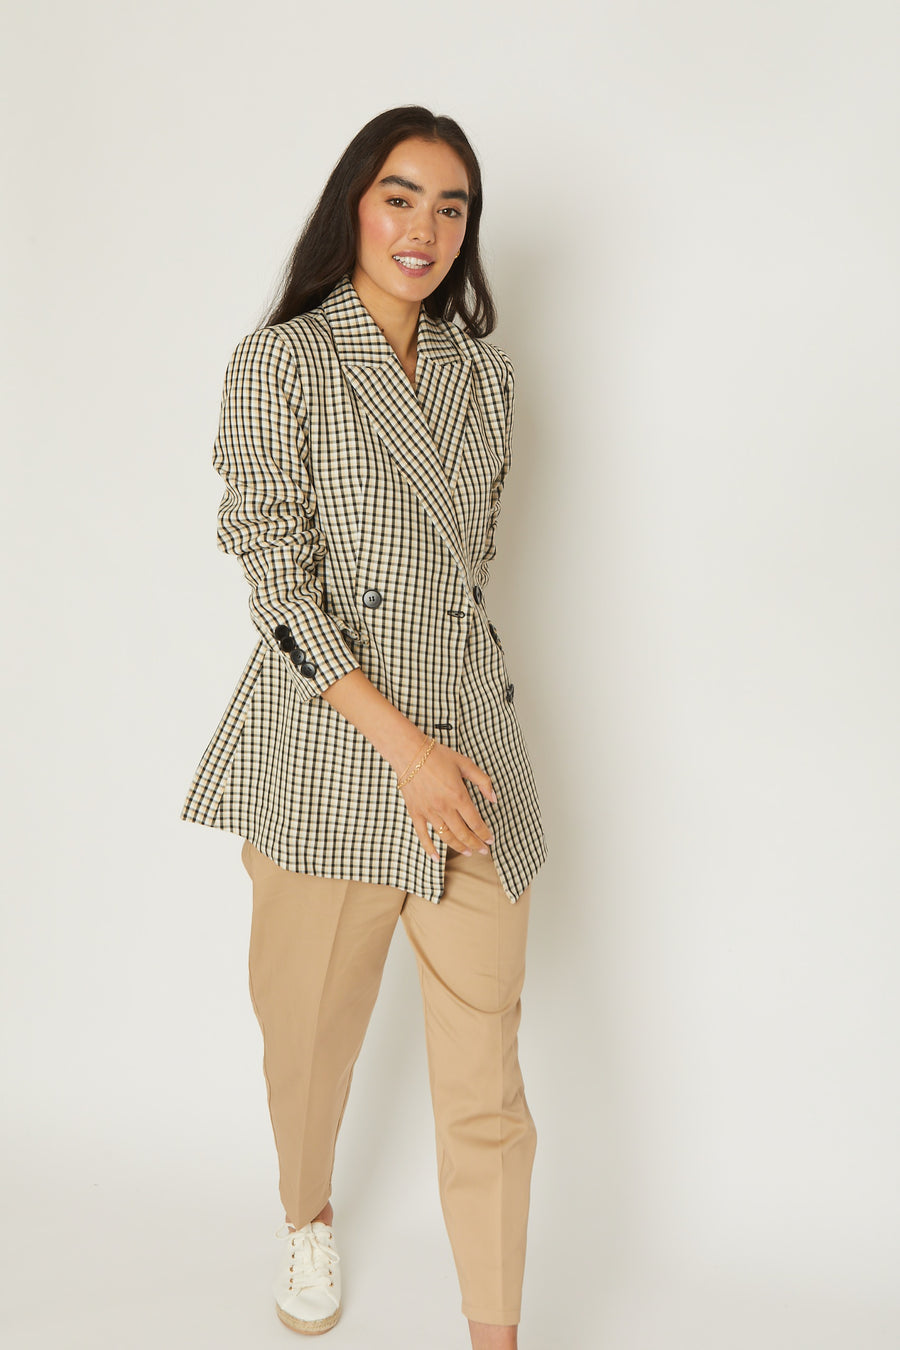 No Srcipt image - Images of 2 of 7 Classic Gingham Print Black White Blazer Jacket Oversized Fit Workwear Office Wear Professional Attire Classic Chic Staple Timeless Blazer